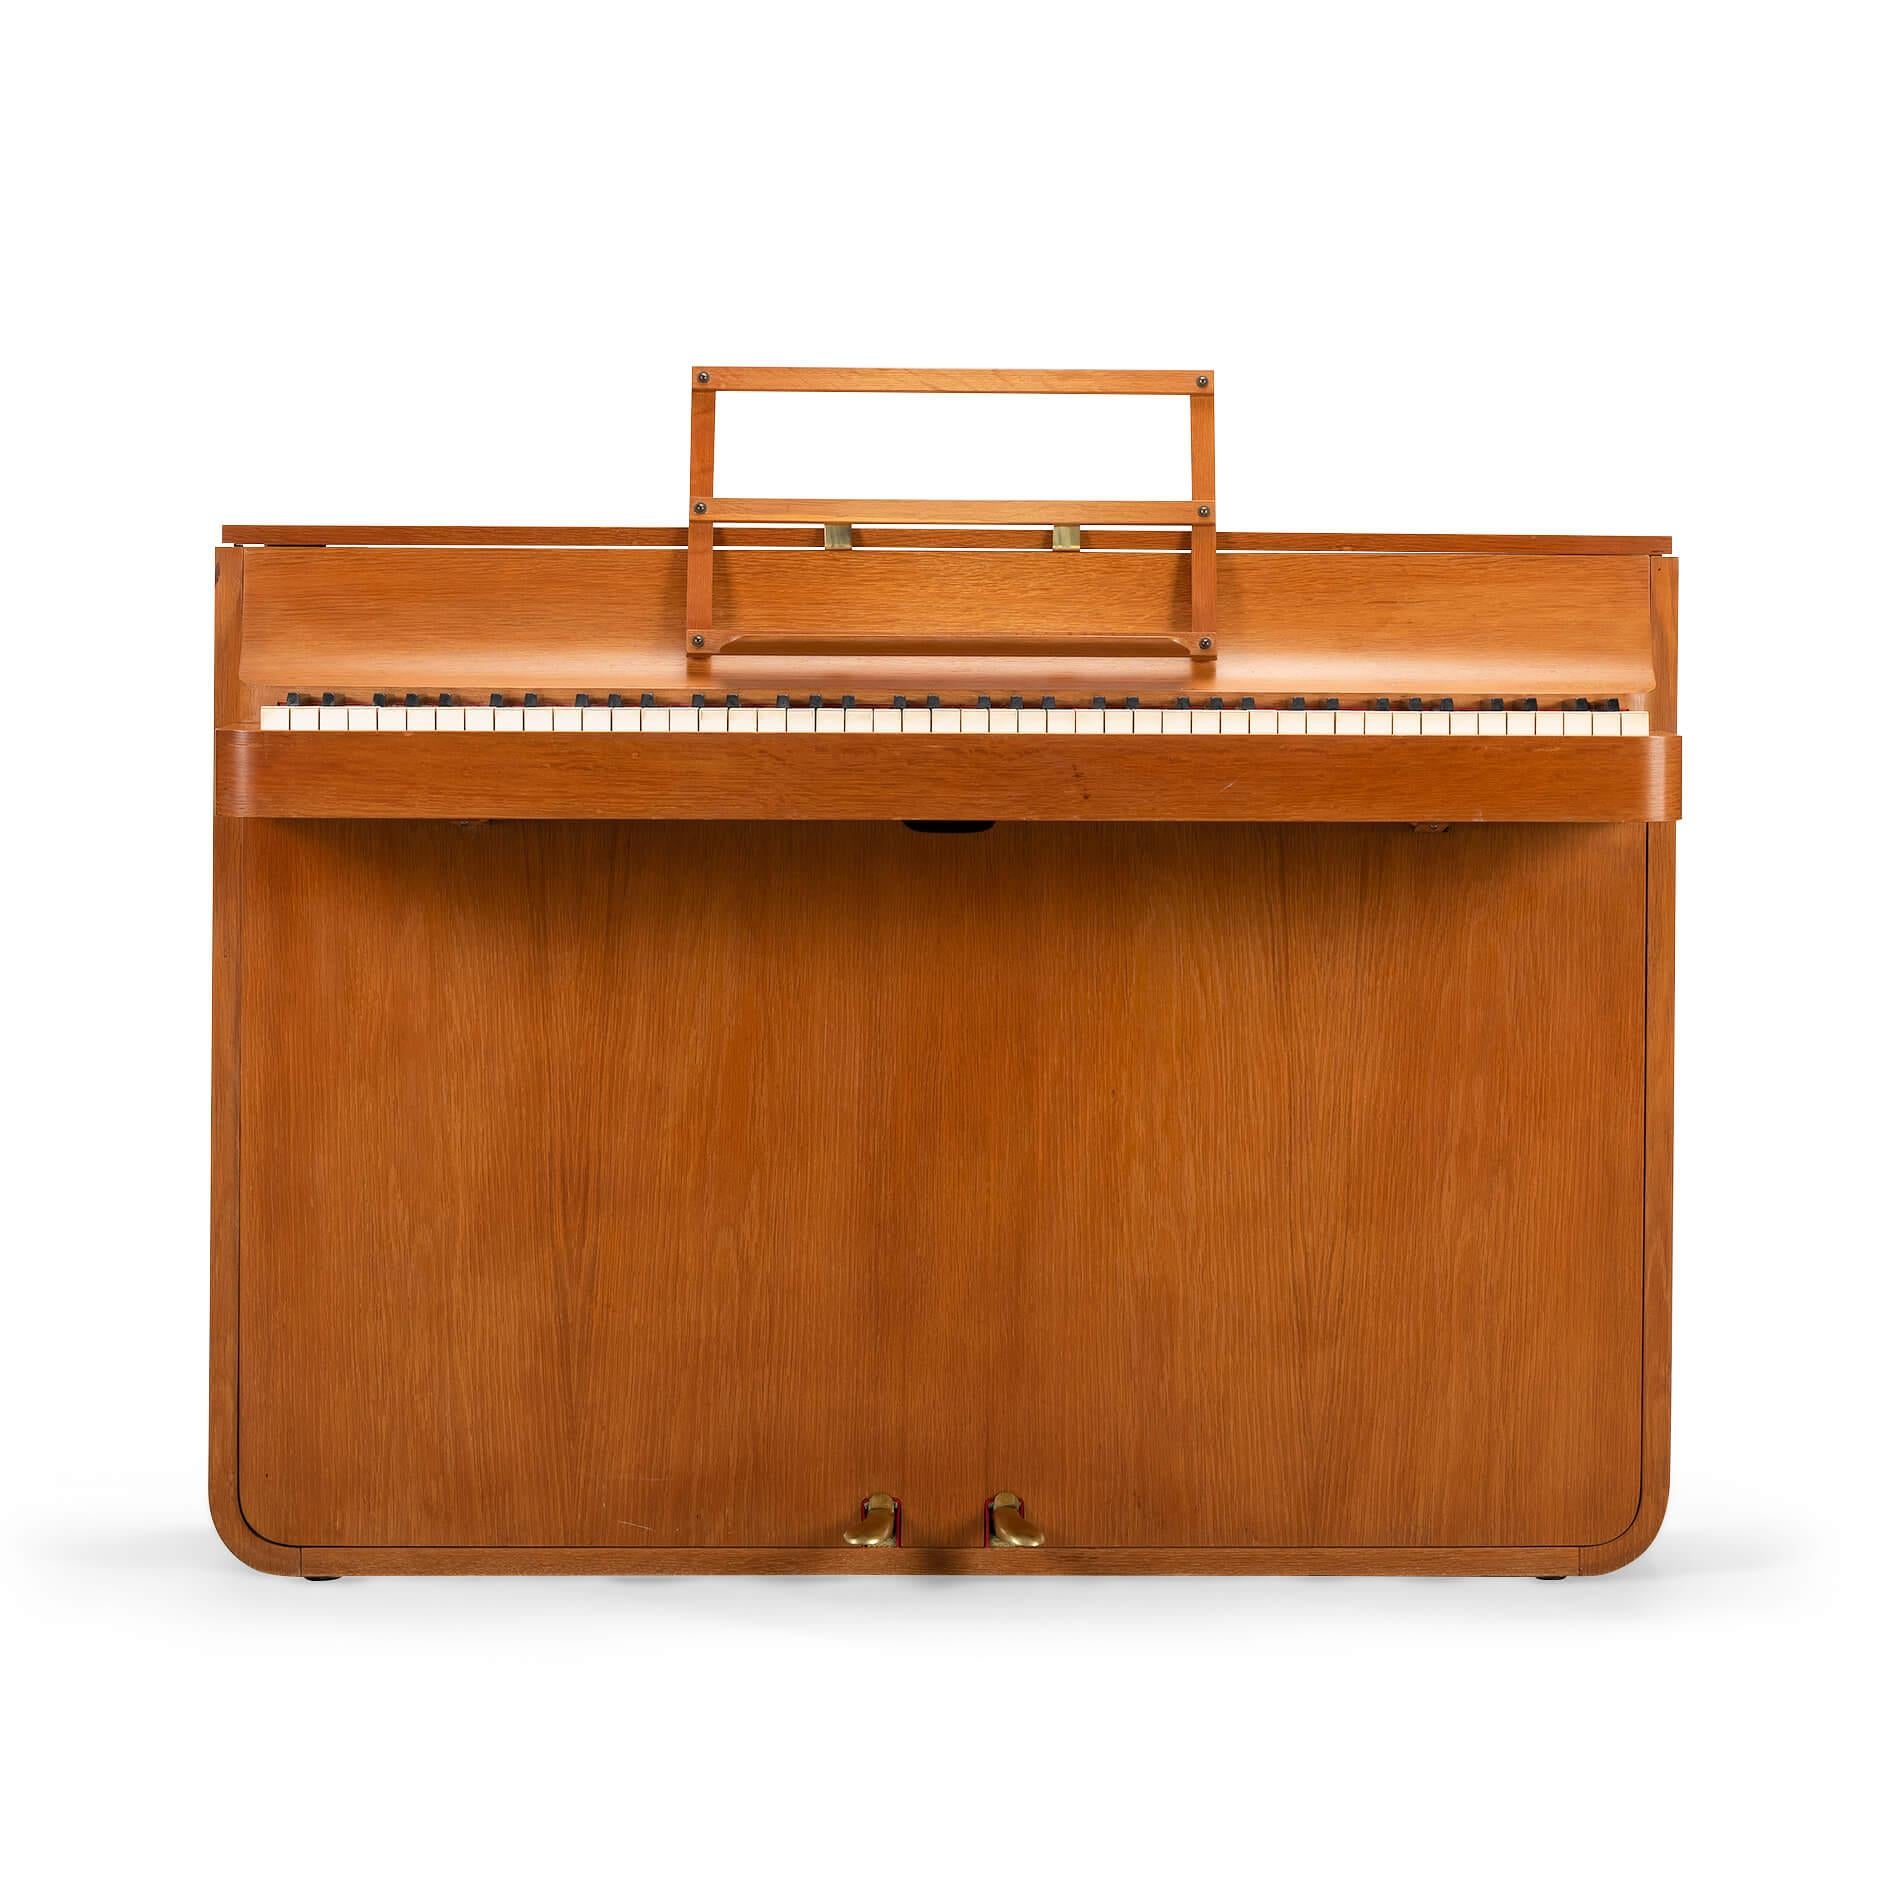 A rare Danish midcentury pianette made of beautiful oak. It is called pianette due to the 82 keys rather than the standard 88 of a full size piano. This pianette is made by renowned piano maker Louis Zwicki. Every piano from Louis Zwicki is